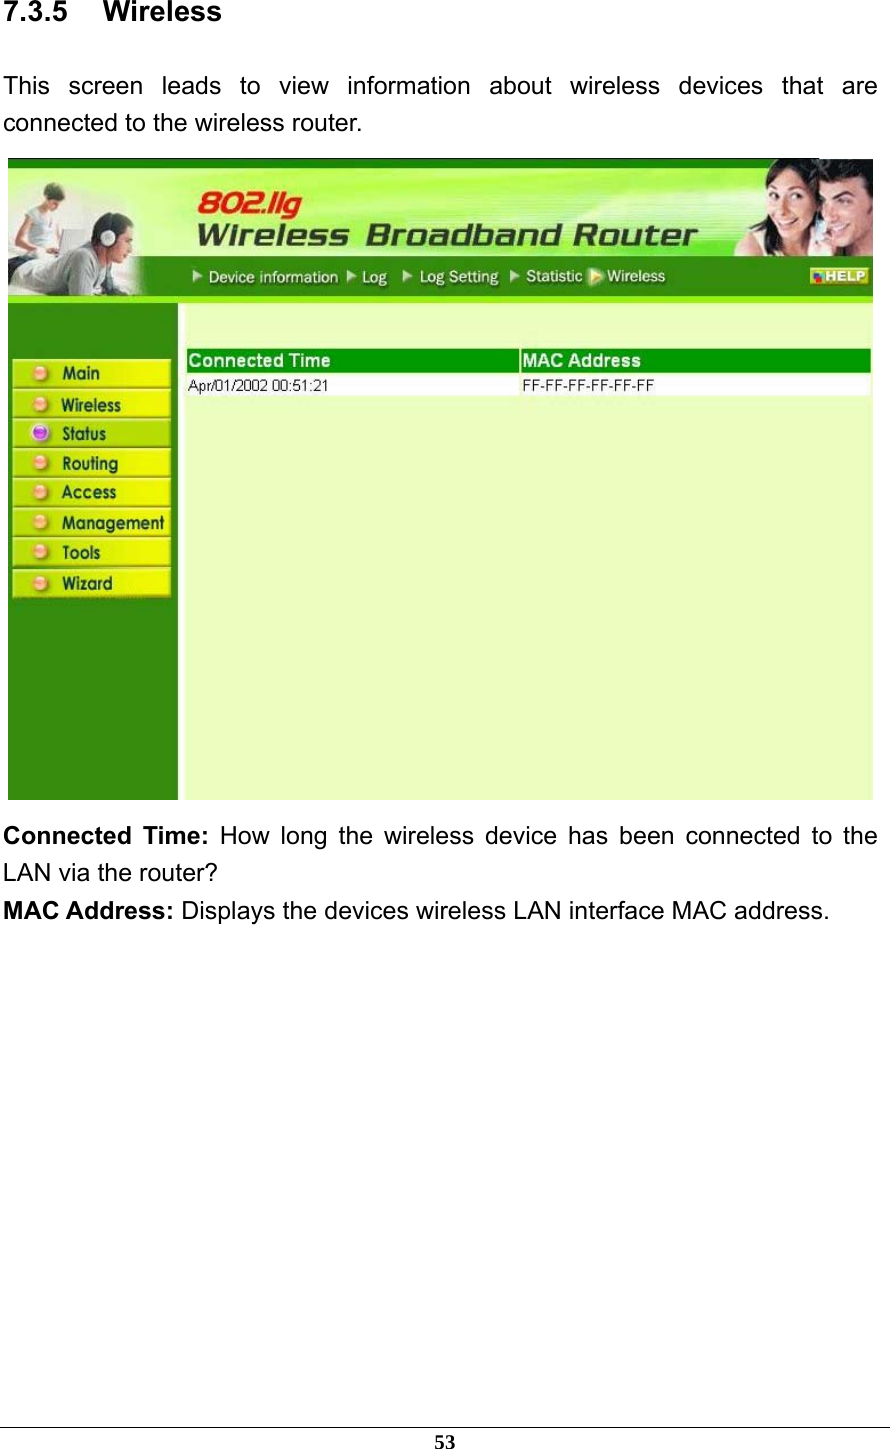 7.3.5 Wireless This screen leads to view information about wireless devices that are connected to the wireless router.  Connected Time: How long the wireless device has been connected to the LAN via the router? MAC Address: Displays the devices wireless LAN interface MAC address. 53 